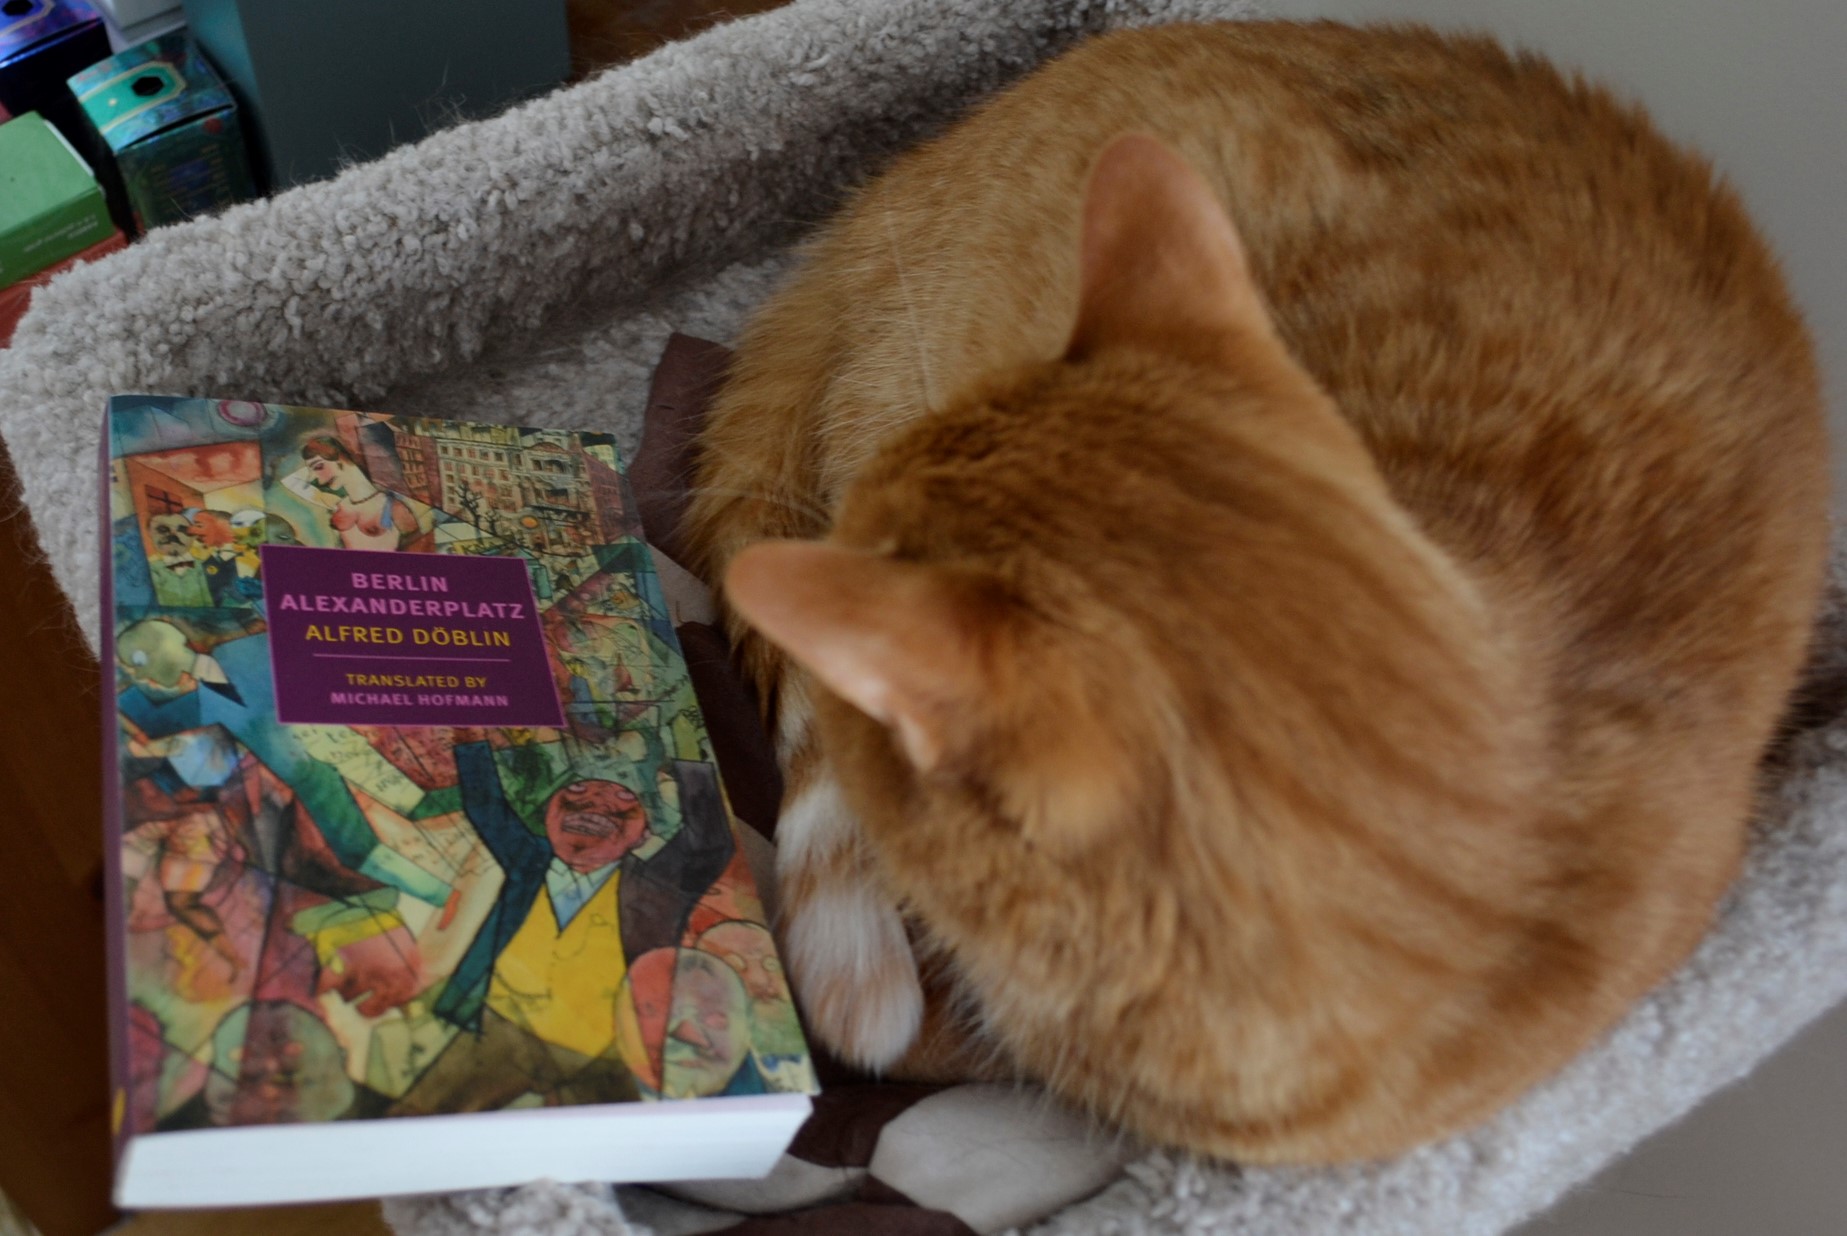 An orange cat is curled up beside a book. The book's cover is filled with busy geometric pictures of people and buildings.